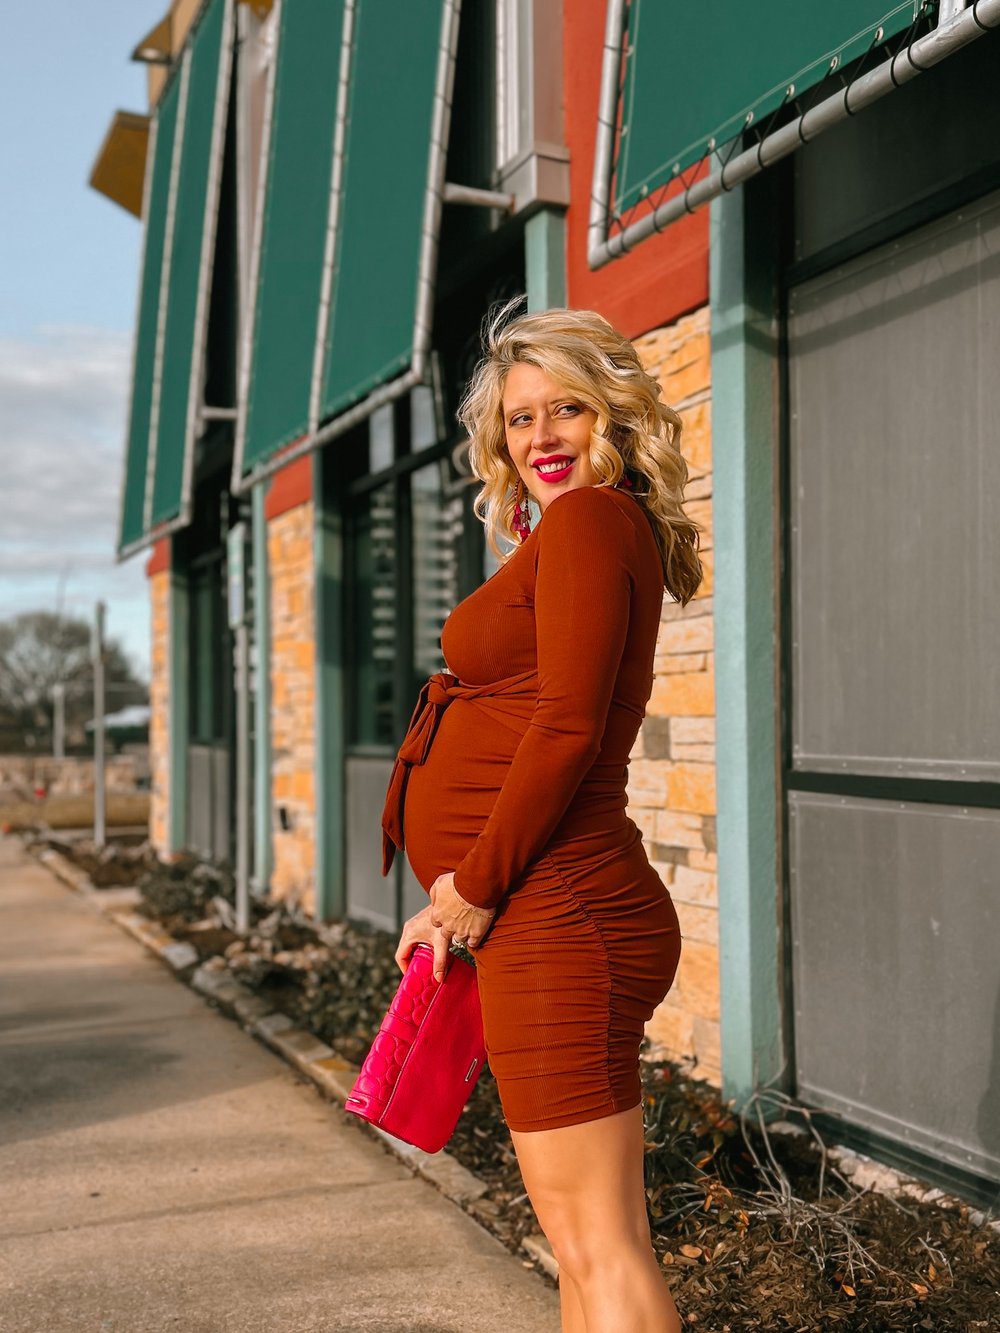 Three Heel Clicks - Maternity Dresses for Now and When Baby Arrives